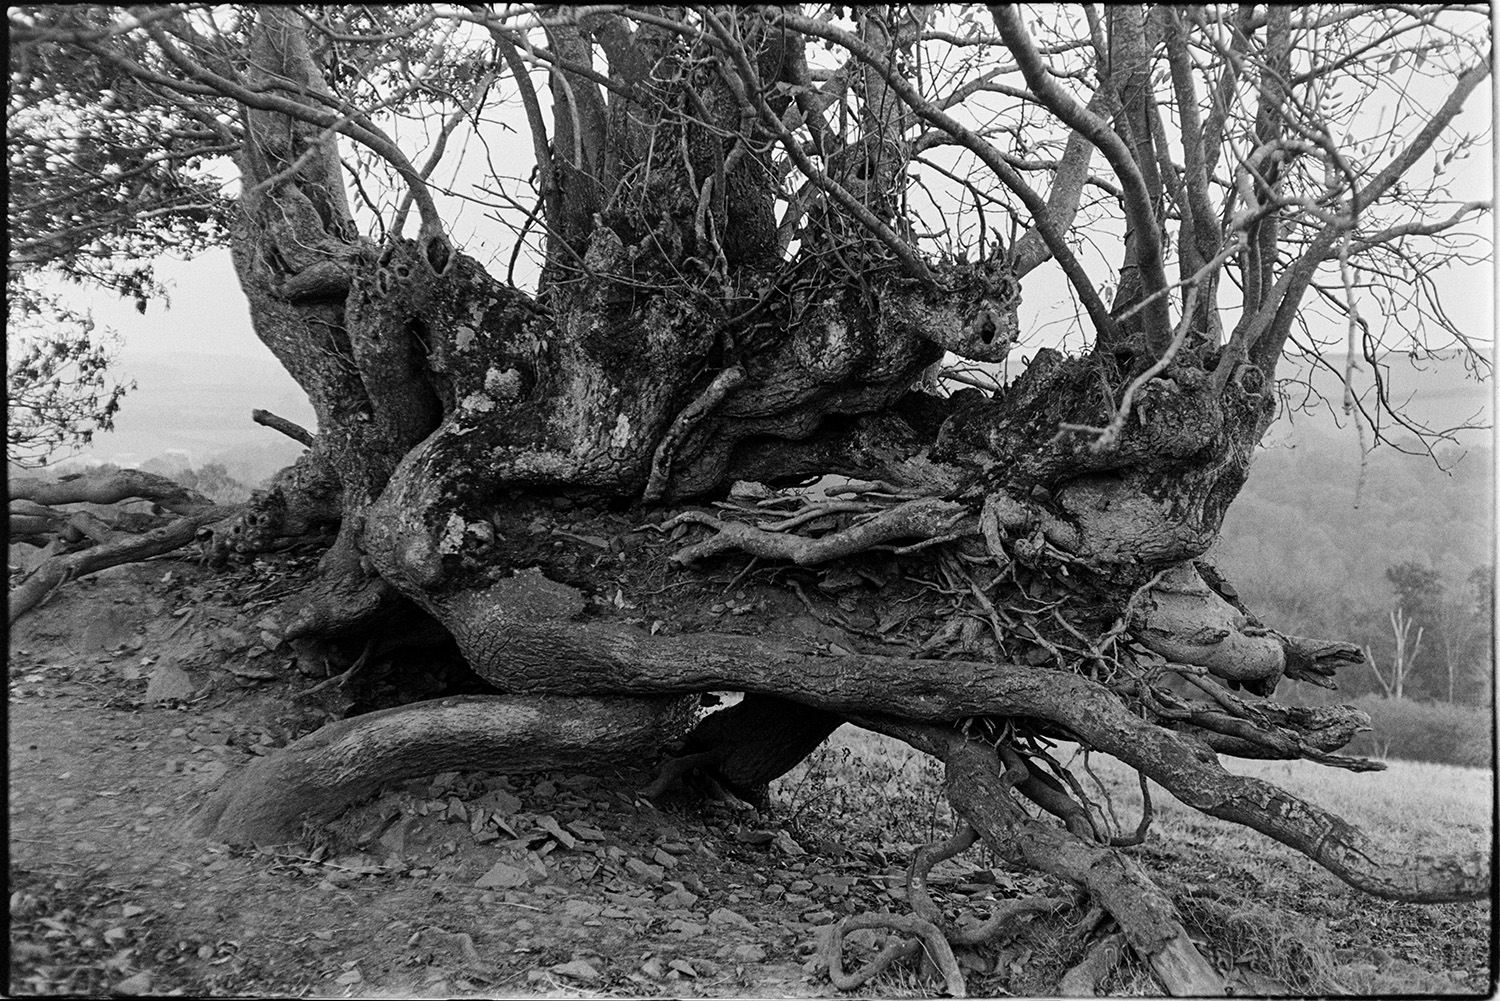 Landscapes with sheep and close up shots of old hedge, lens test. 
[The gnarled roots and branches of a tree in an old hedge at Bridge Reeve, Chulmleigh. This image was taken by James Ravilious to try a new lens.]